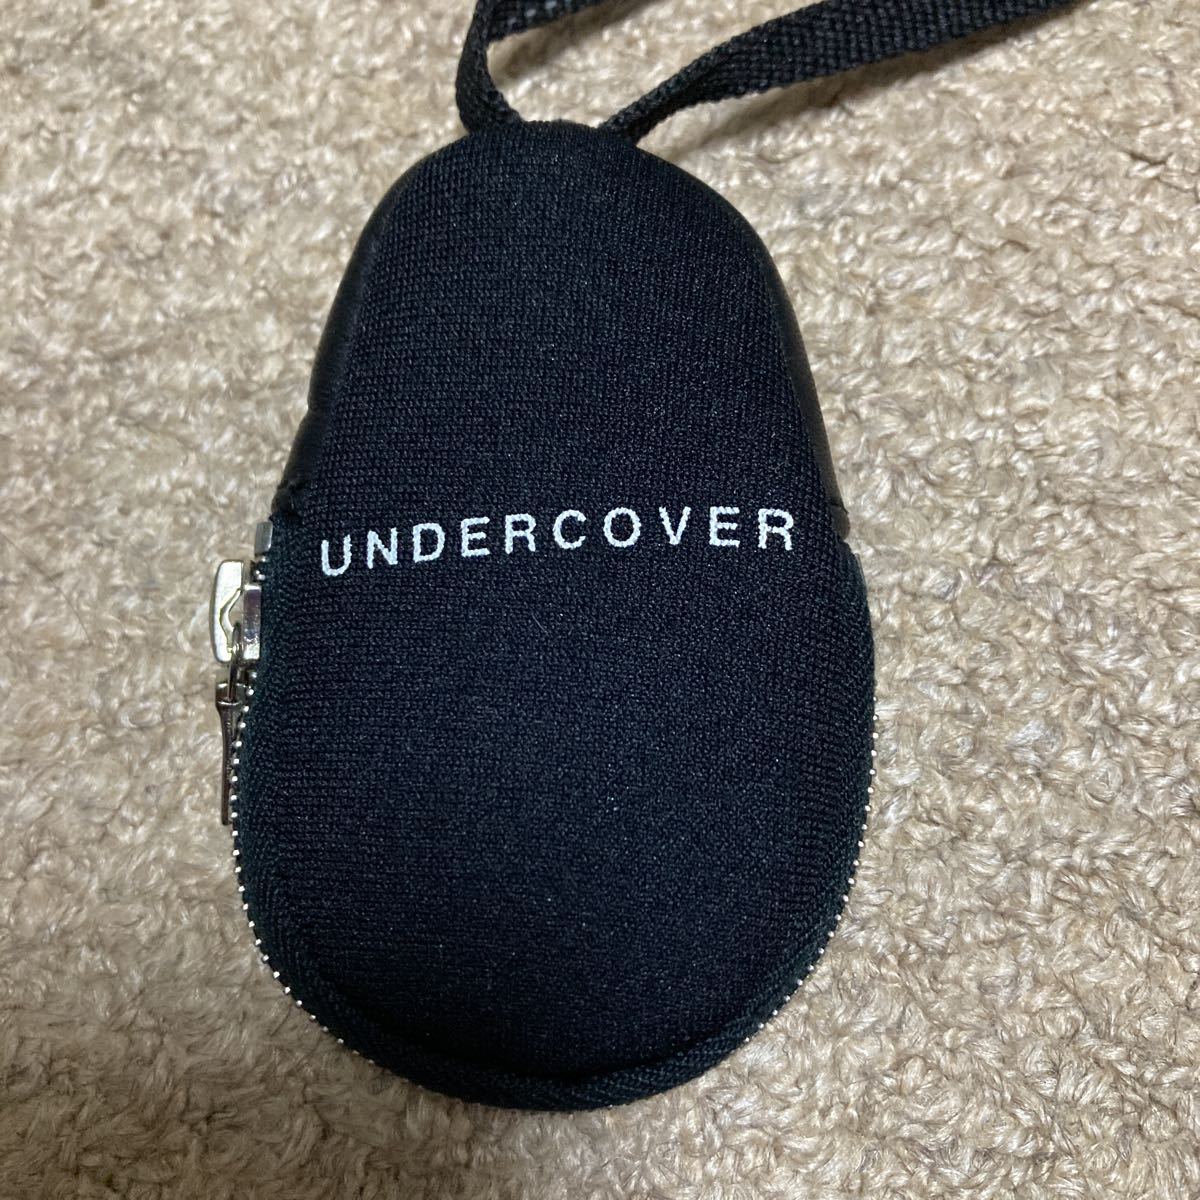  undercover key chain necklace black unused goods height ..